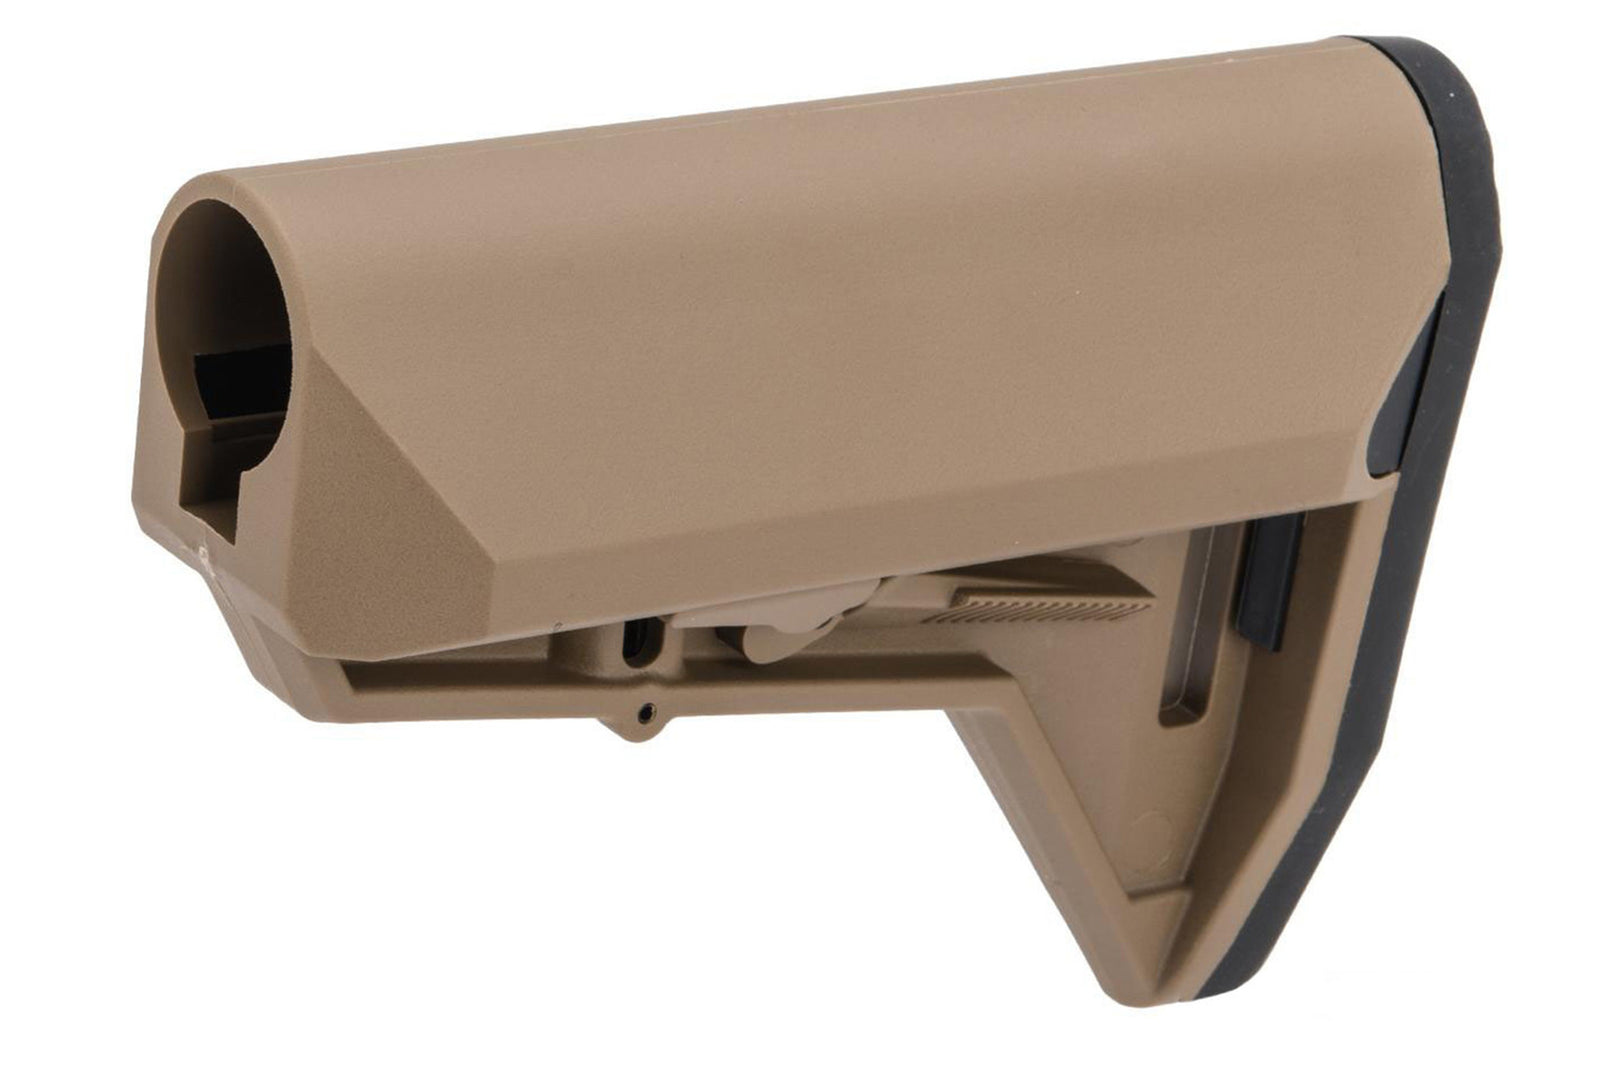 CYMA Retractable Battery Storage Stock for M4 / M16 Series Rifles